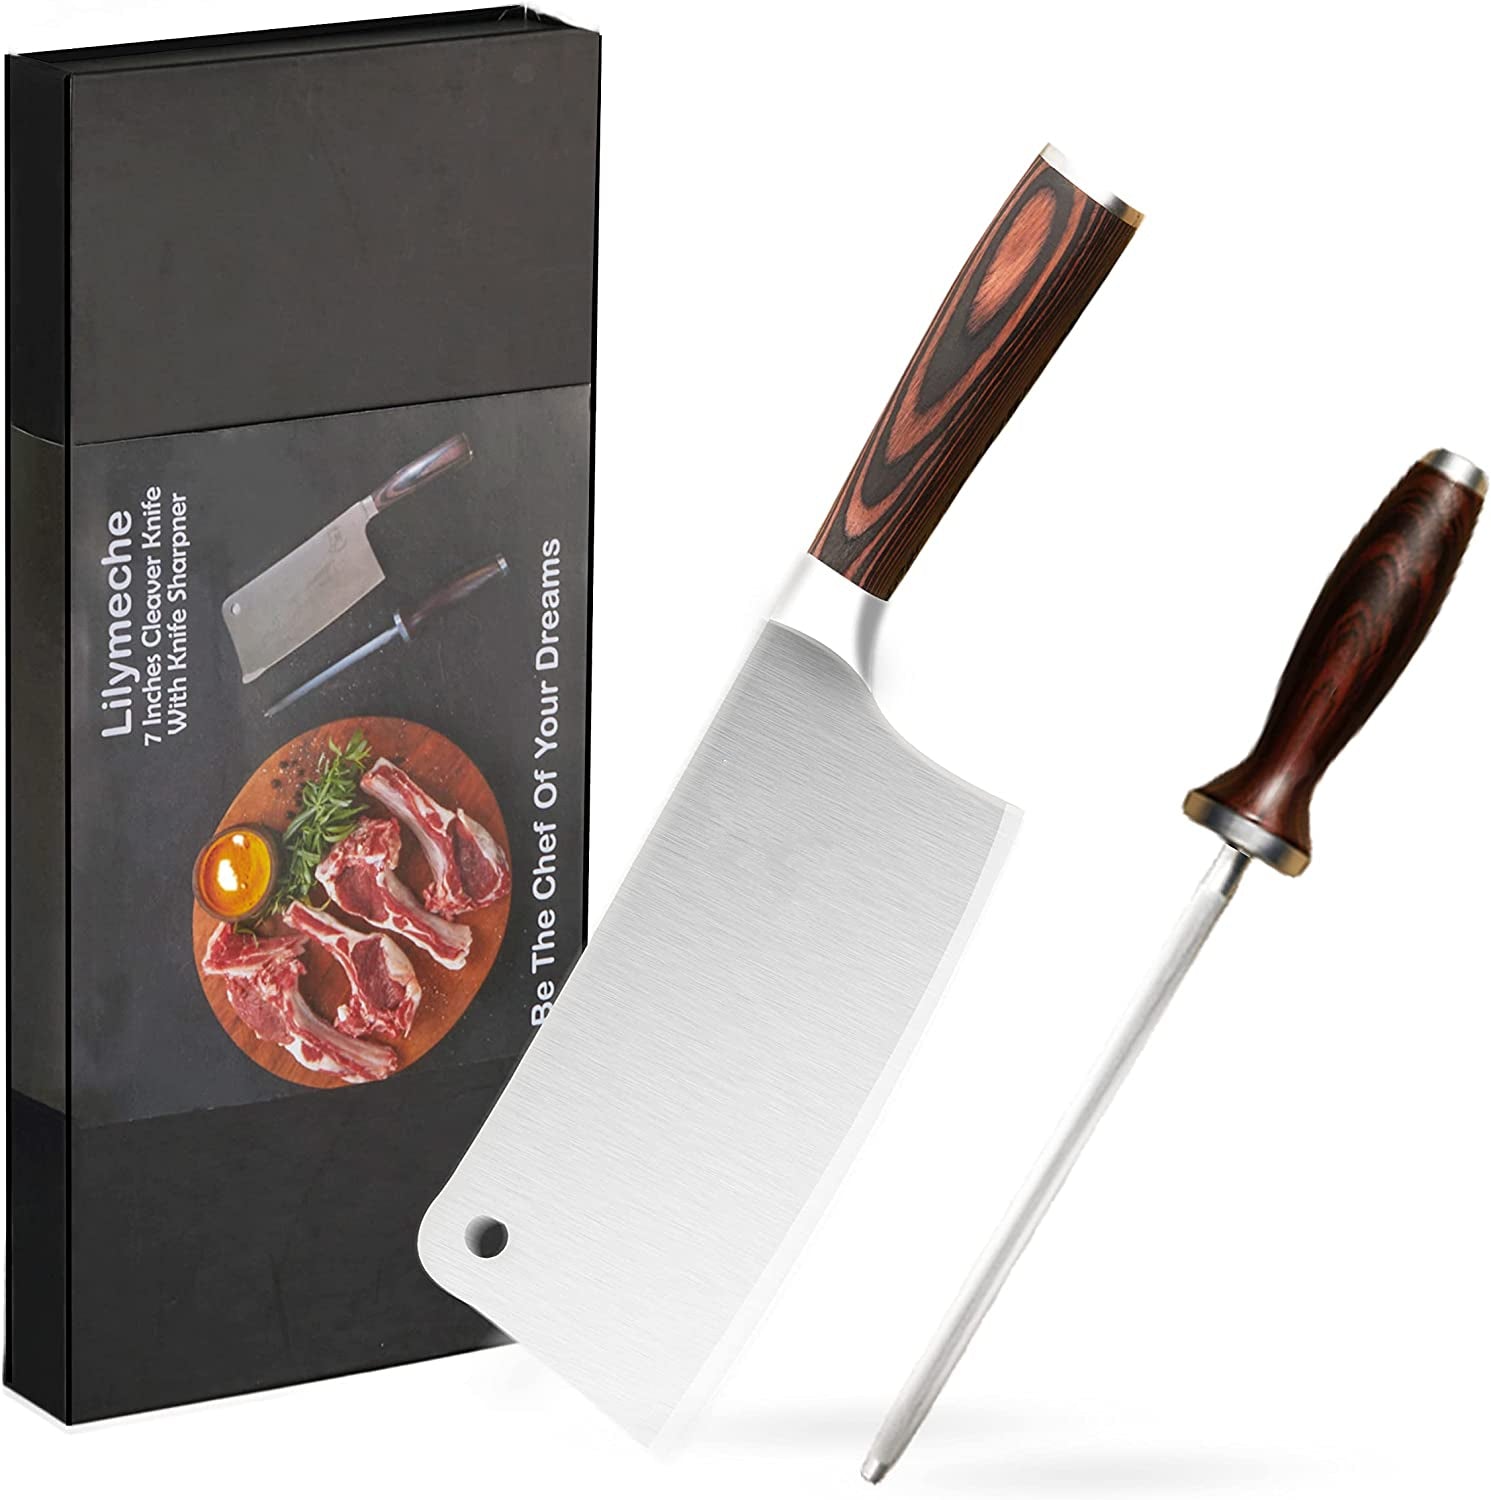 Cleaver Knife 7 Inch Stainless Steel - Professional Chef Knife With Pakka  Wood Full Tang Handle, Heavy Duty Blade For Home Kitchen And Restaurant